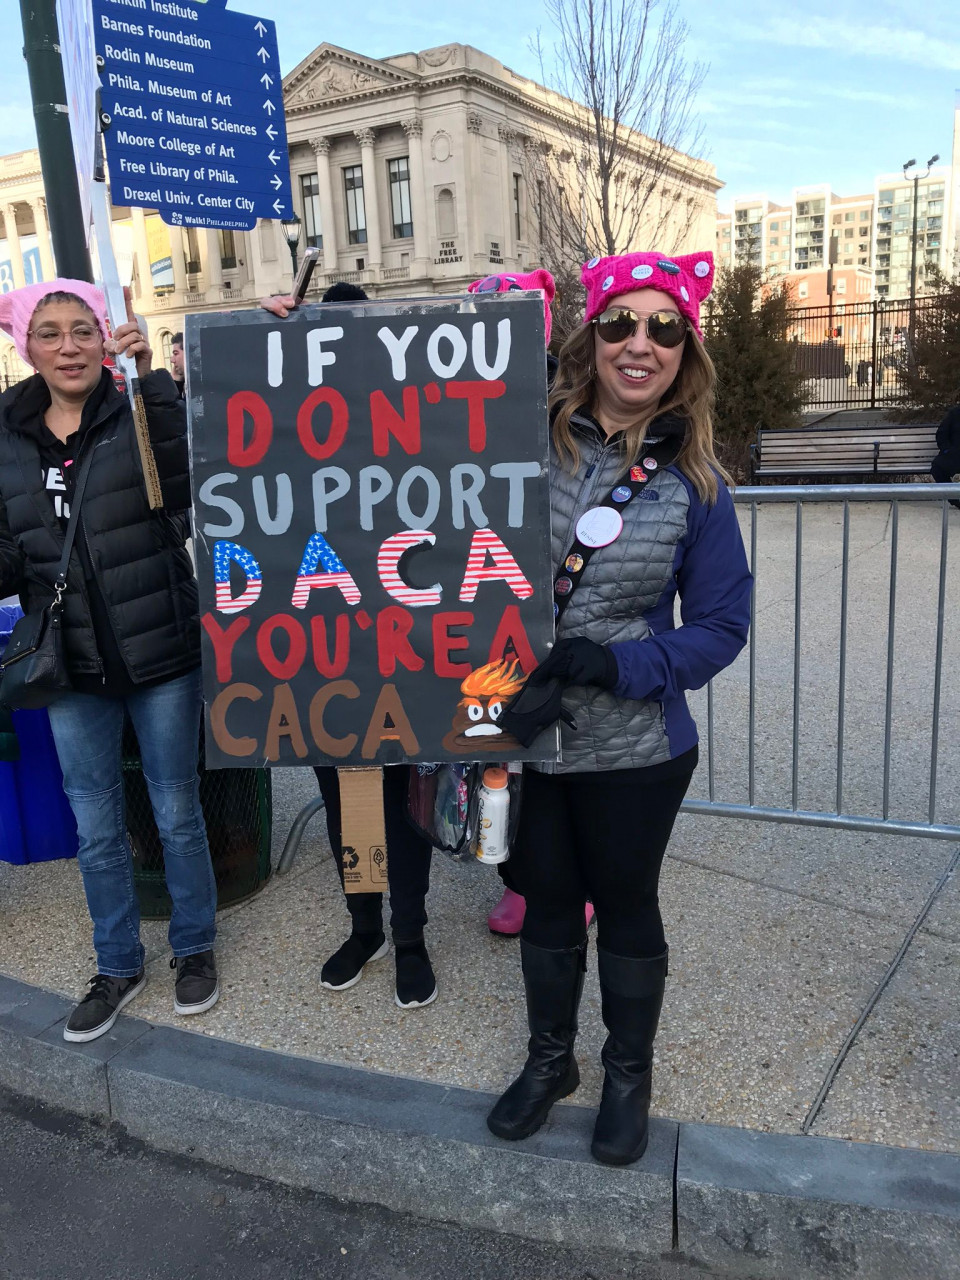 Philly Women's March 2018 - If you don't support <a class="bx-tag" rel="tag" href="https://wethepeople.care/page/view-channel-profile?id=1223"><s>#</s><b>DACA</b></a> you're a caca